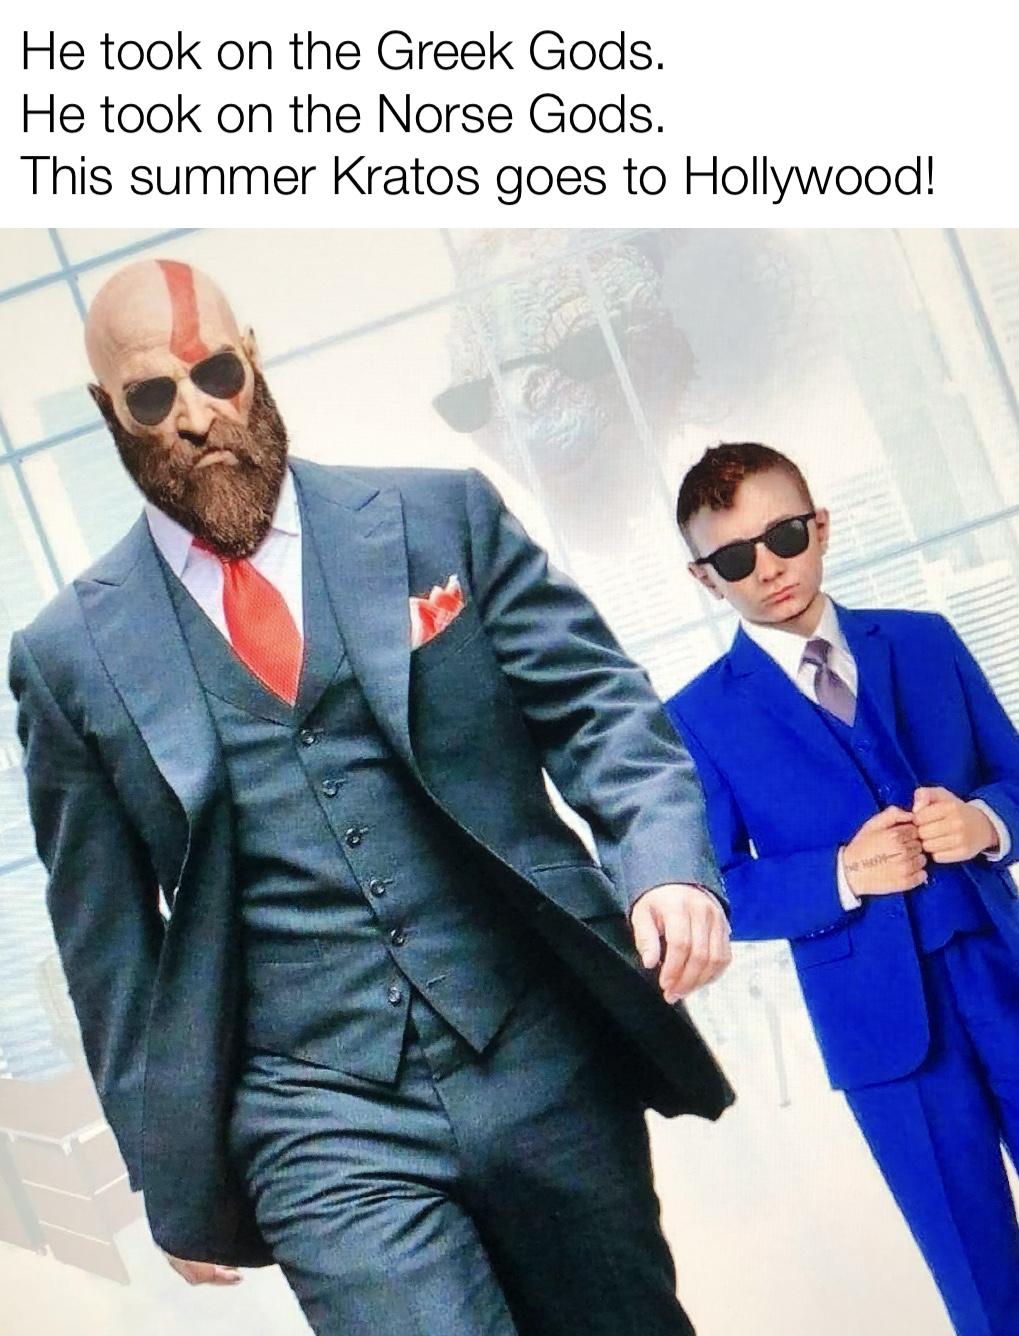 funny memes and pics - God of War - He took on the Greek Gods. He took on the Norse Gods. This 17 summer Kratos goes to Hollywood! 10W